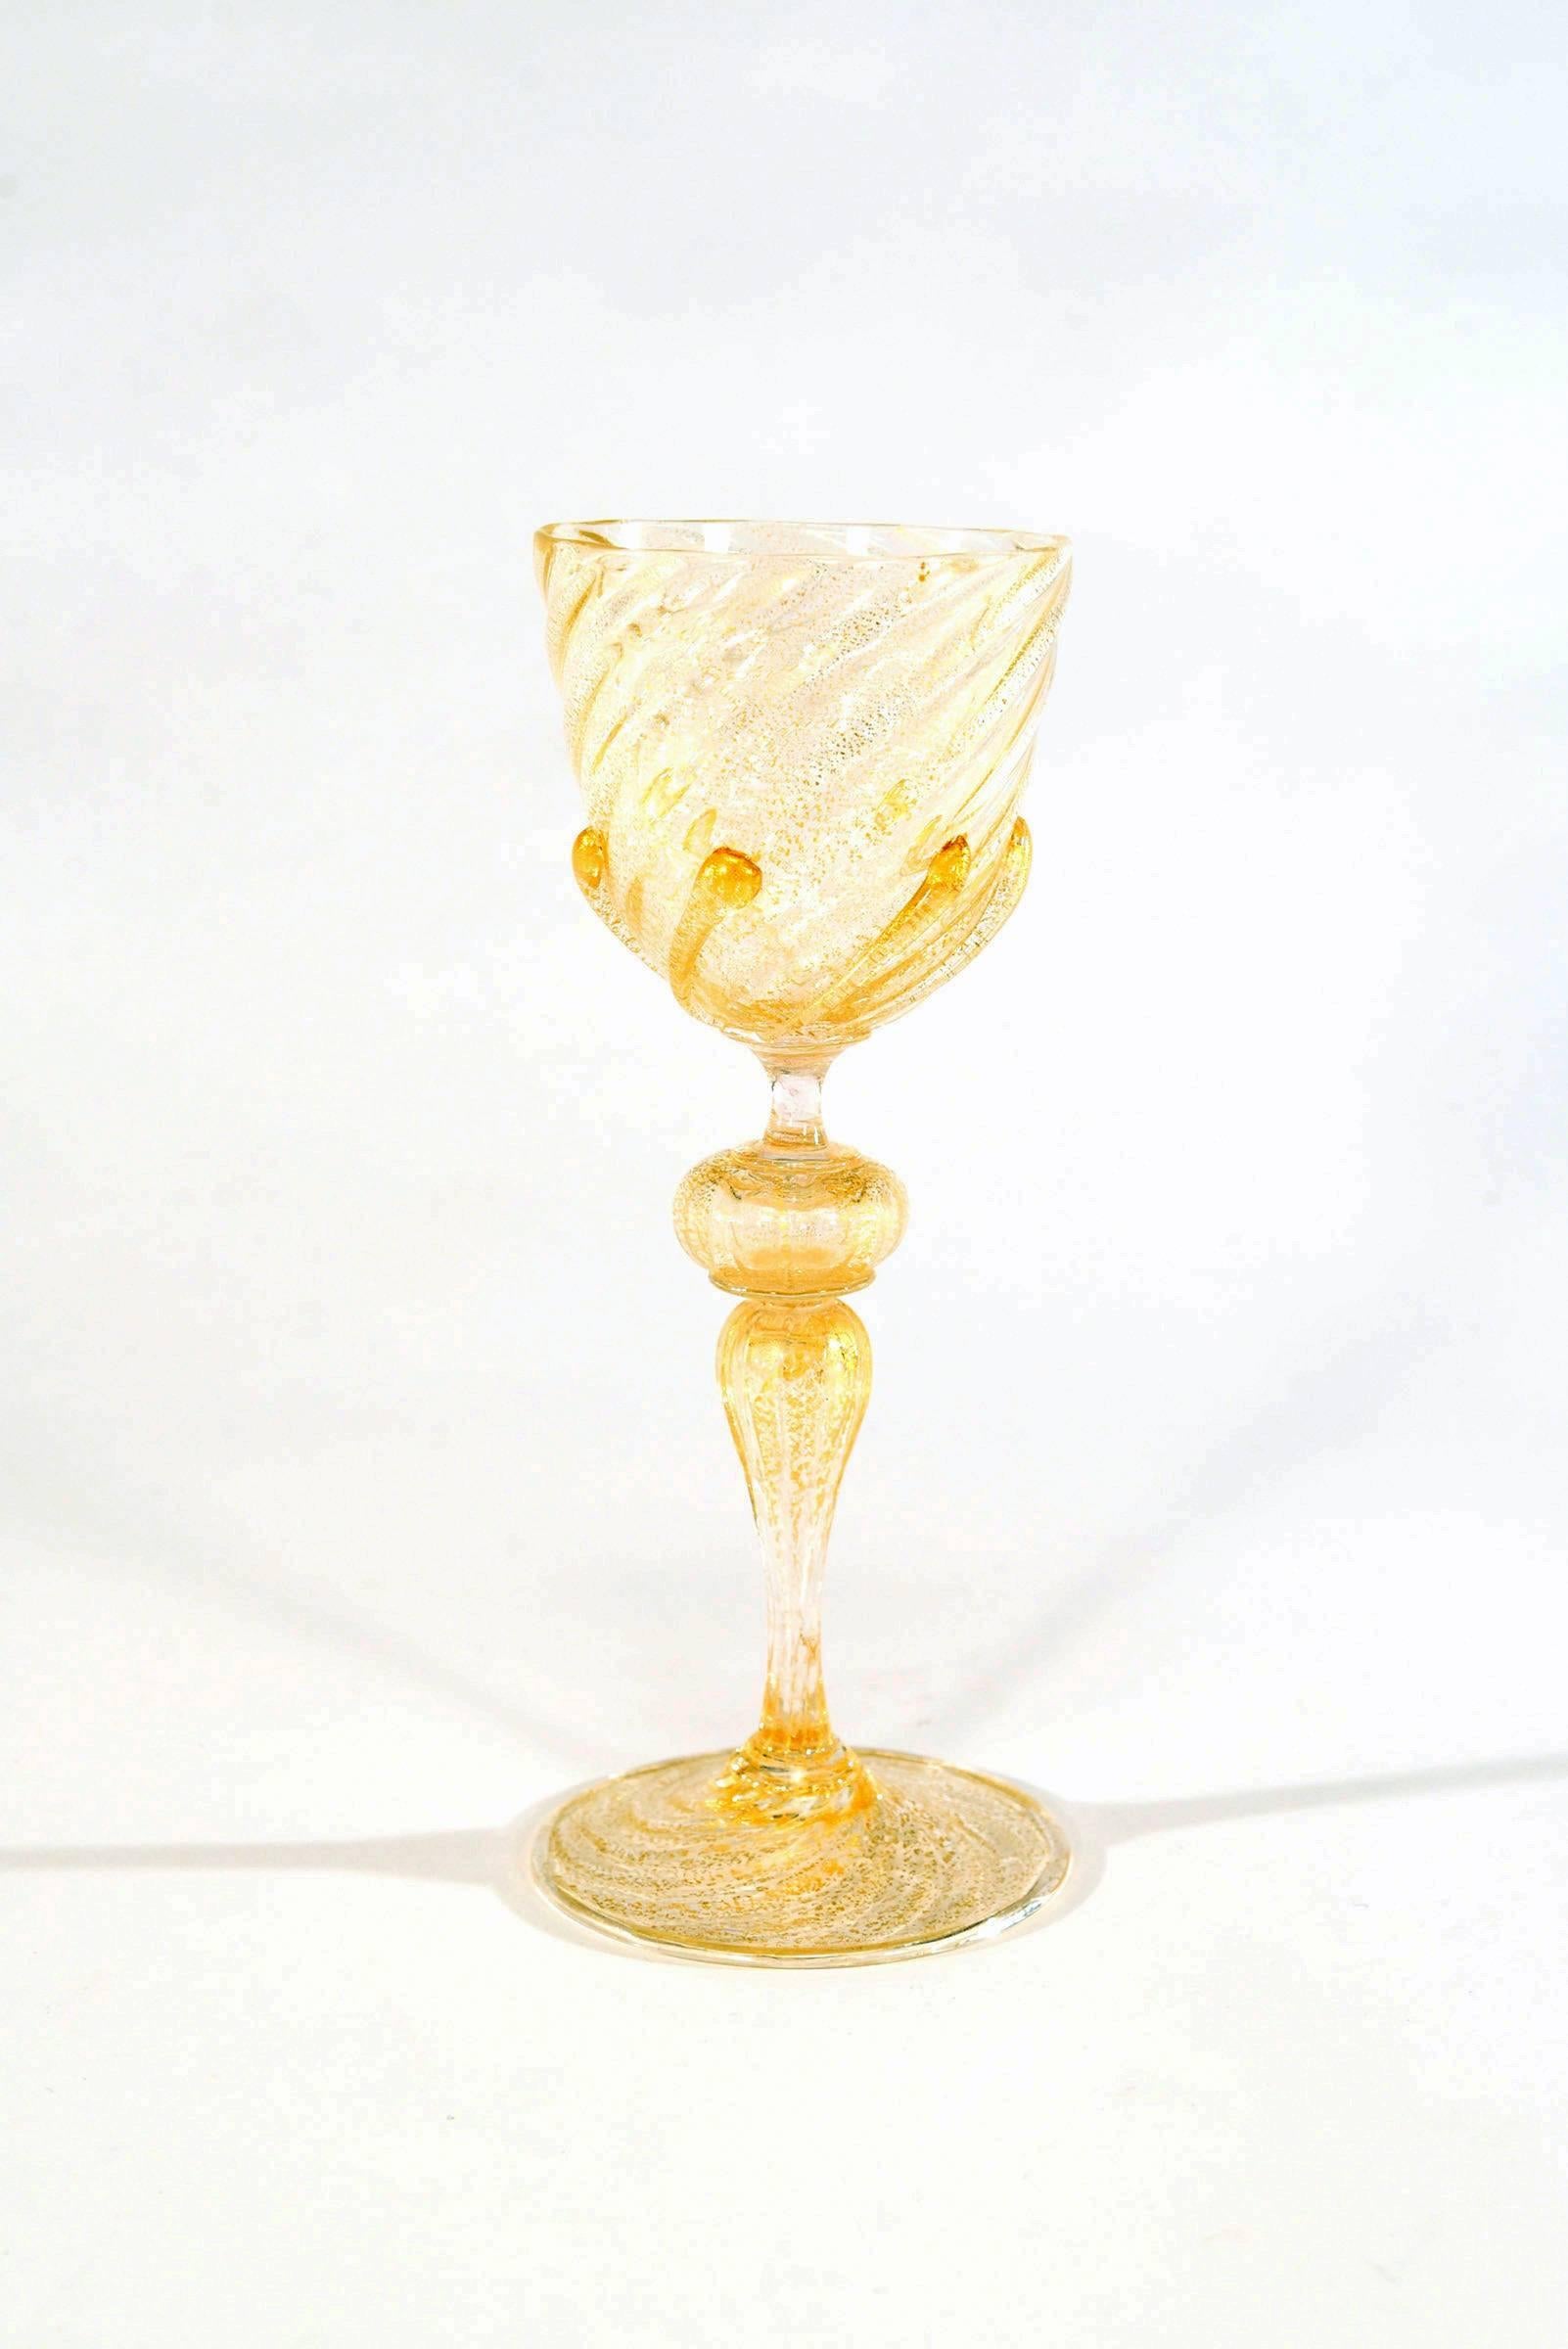 12 Venetian Salviati Large Goblets W/ Gold Leaf Inclusions & Applied Prunts  In Excellent Condition For Sale In Great Barrington, MA